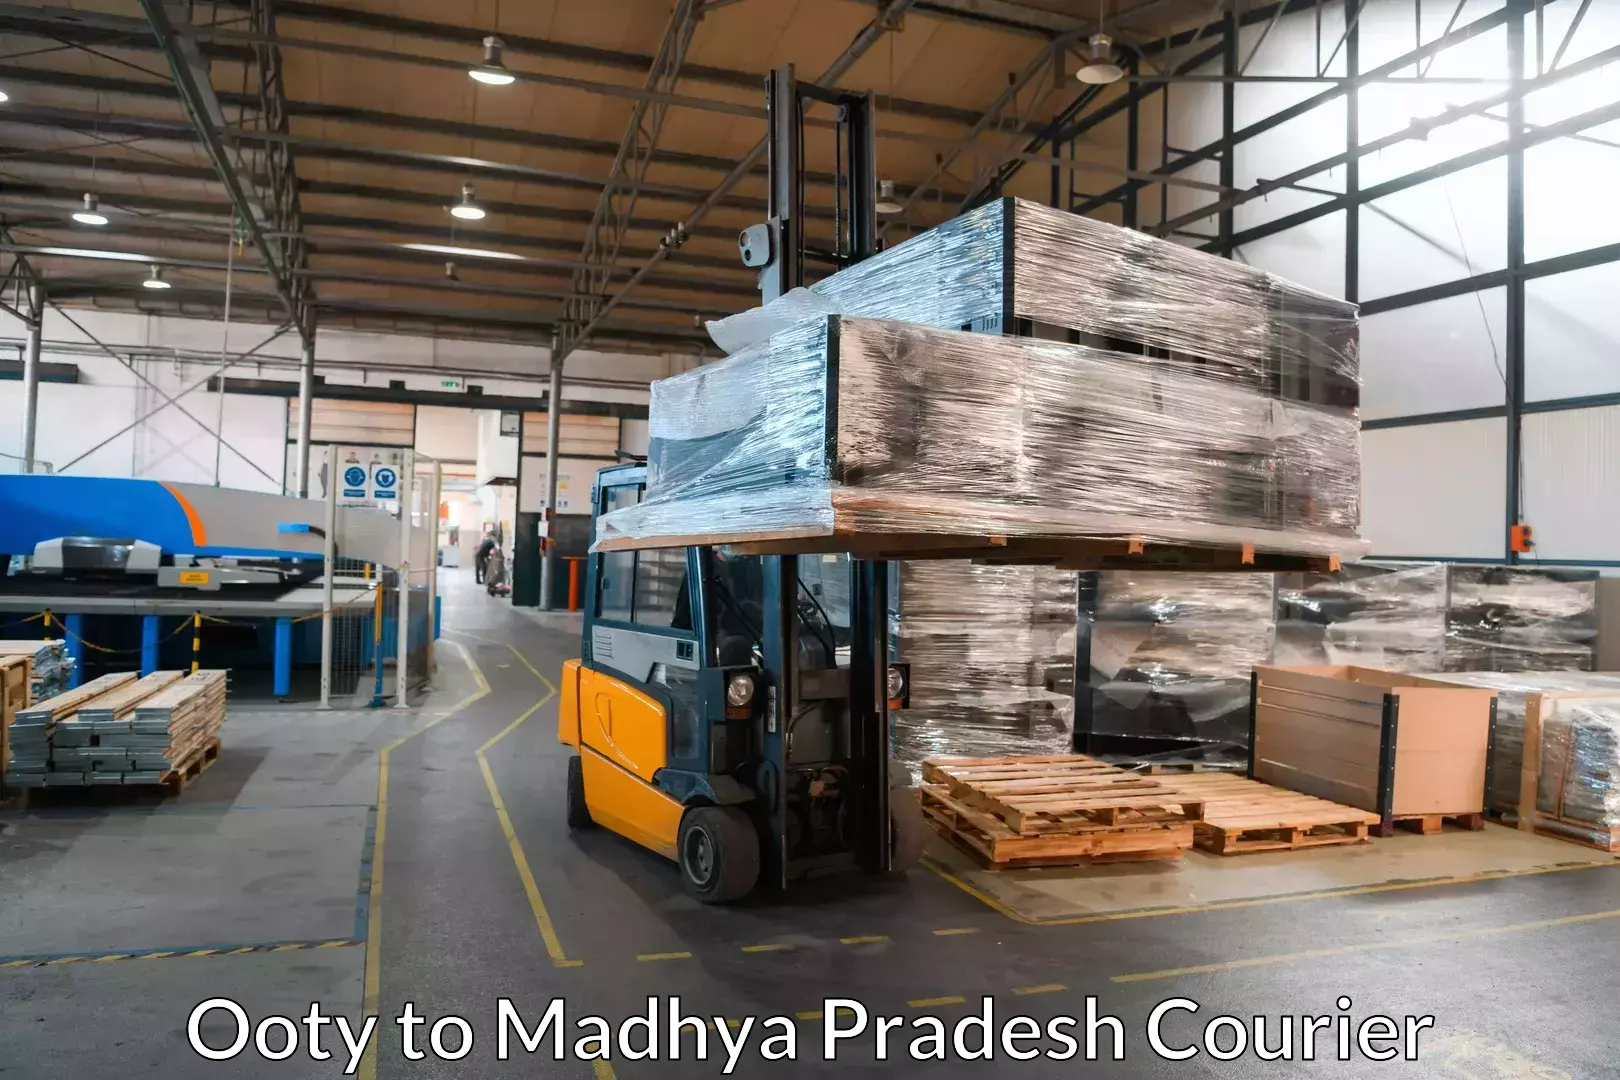 Moving and packing experts Ooty to Madhya Pradesh